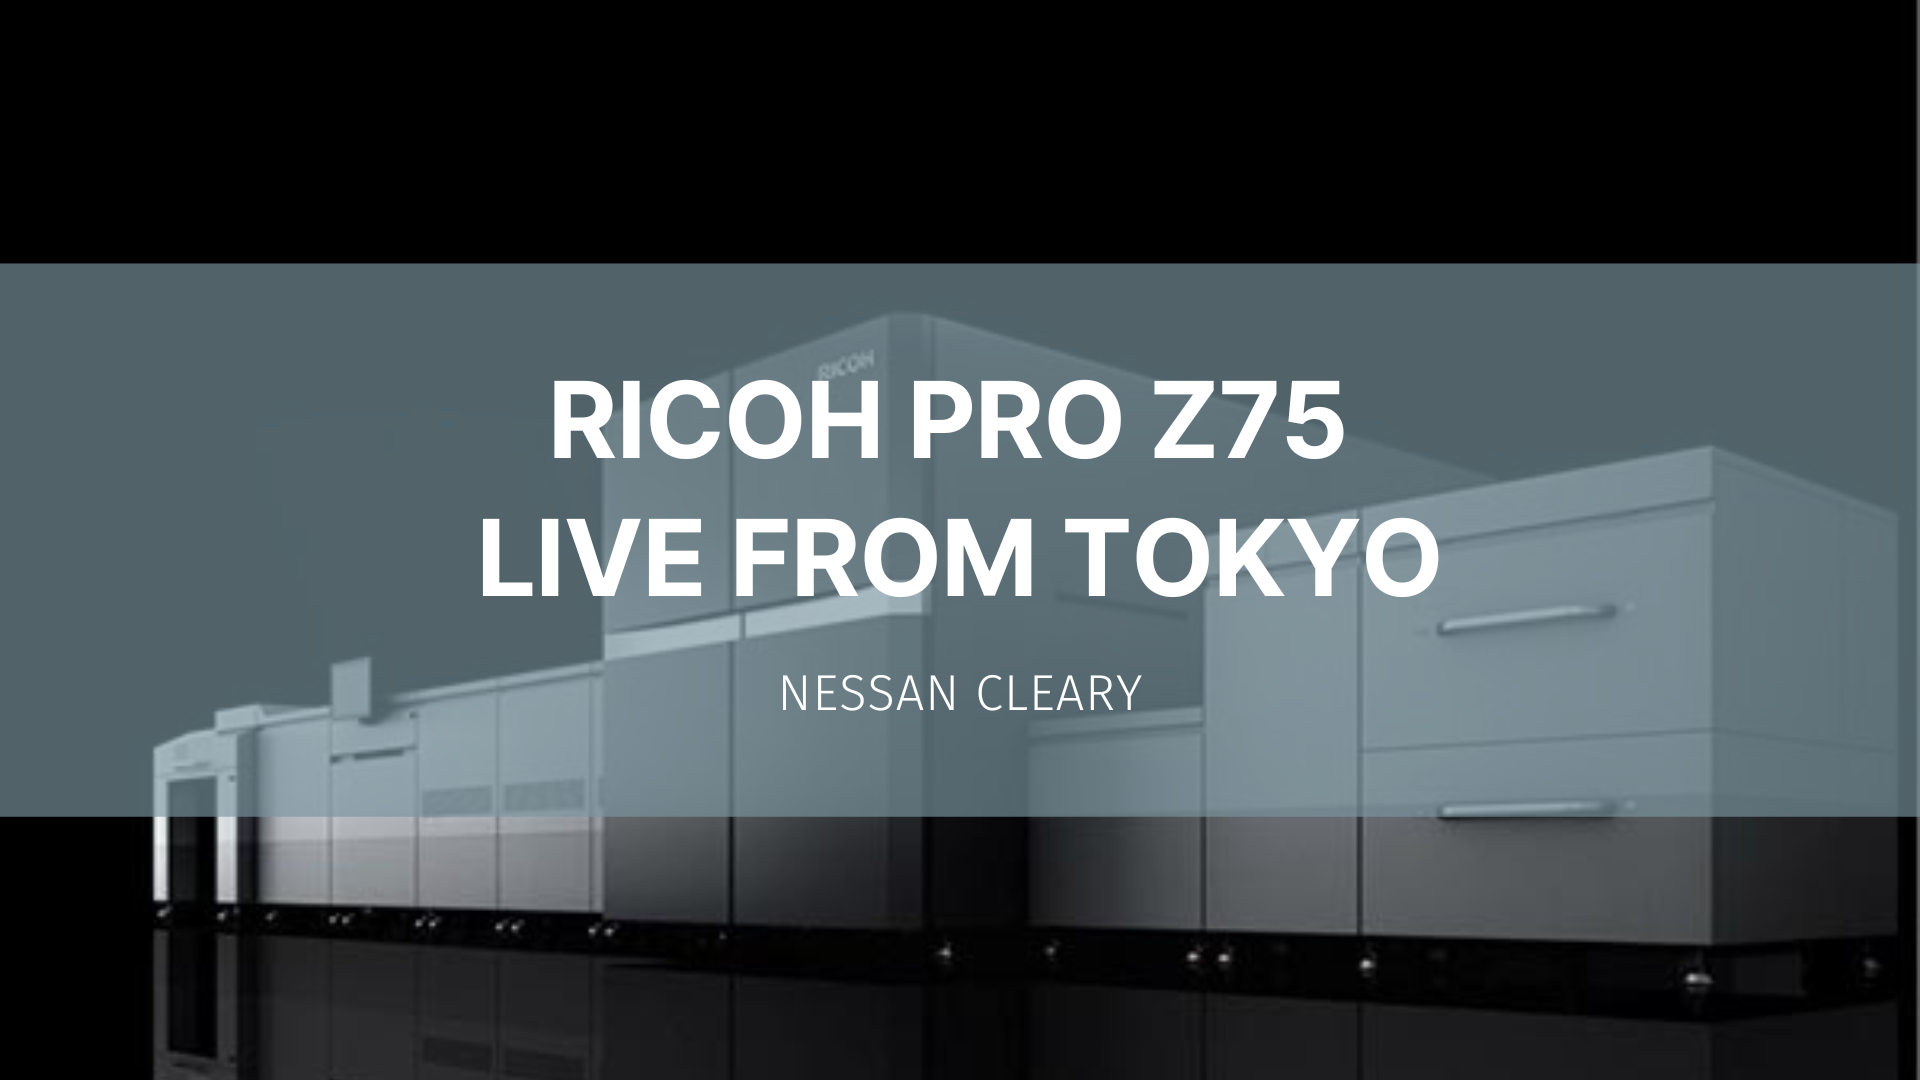 Featured image for “Ricoh Pro Z75 live from Tokyo”